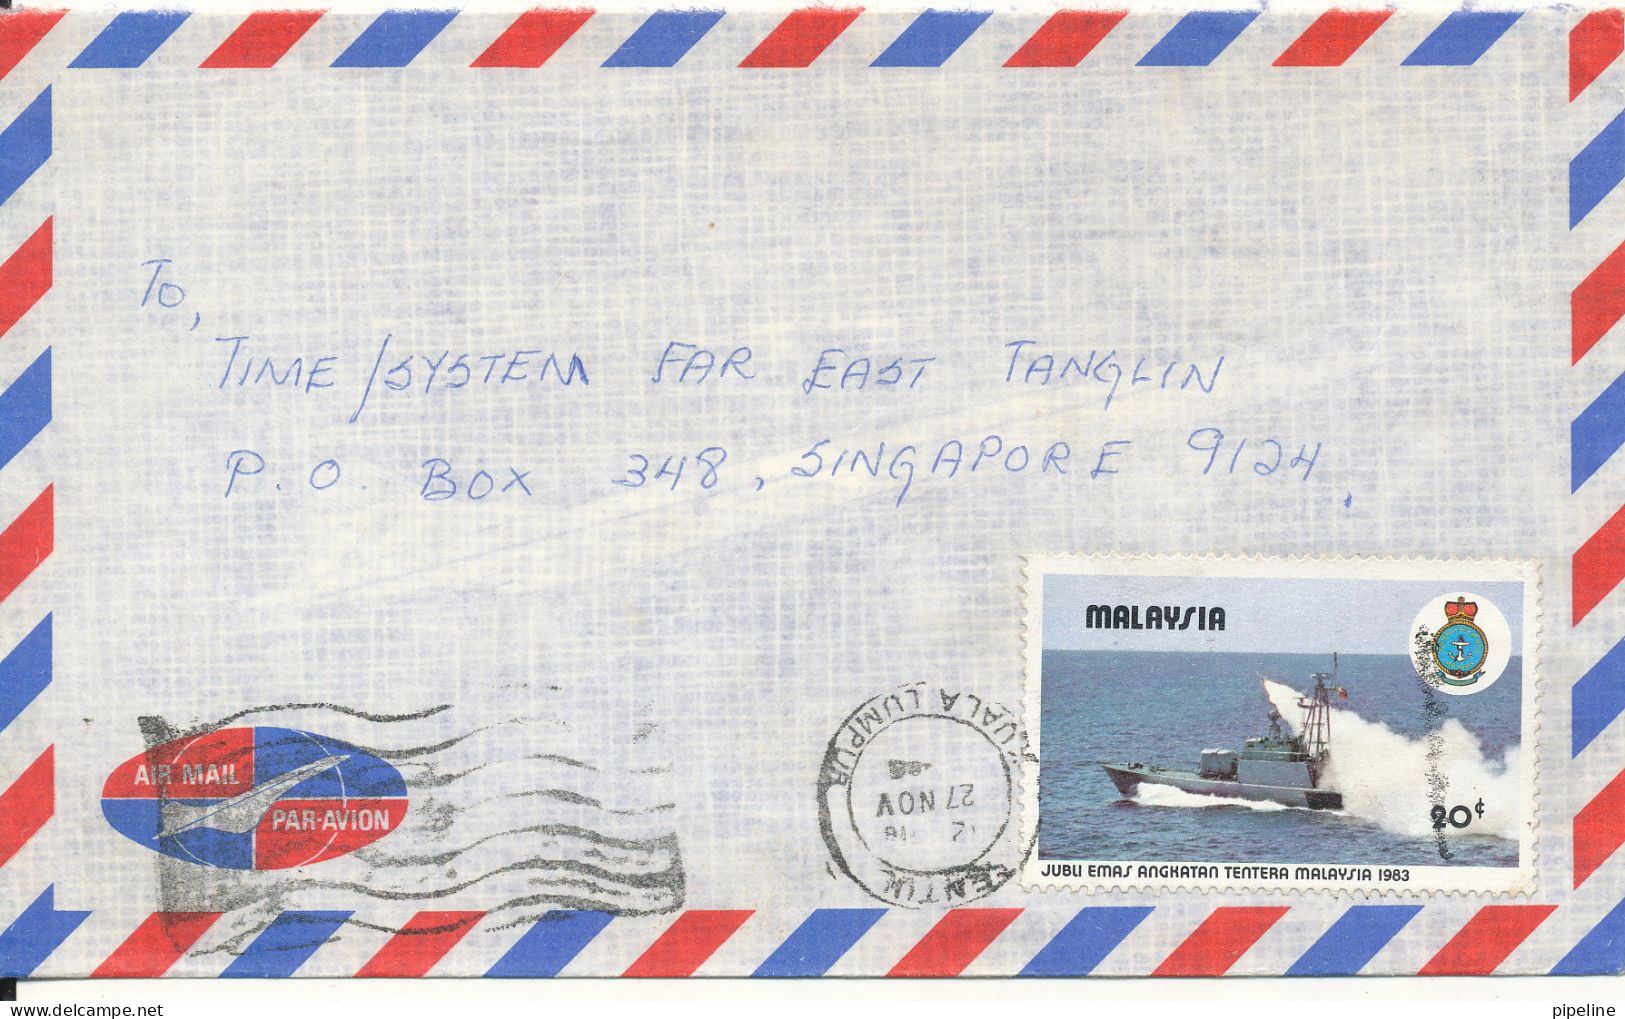 Malaysia Air Mail Cover Sent To Singapore 27-11-1986 ?? Single Franked - Malaysia (1964-...)